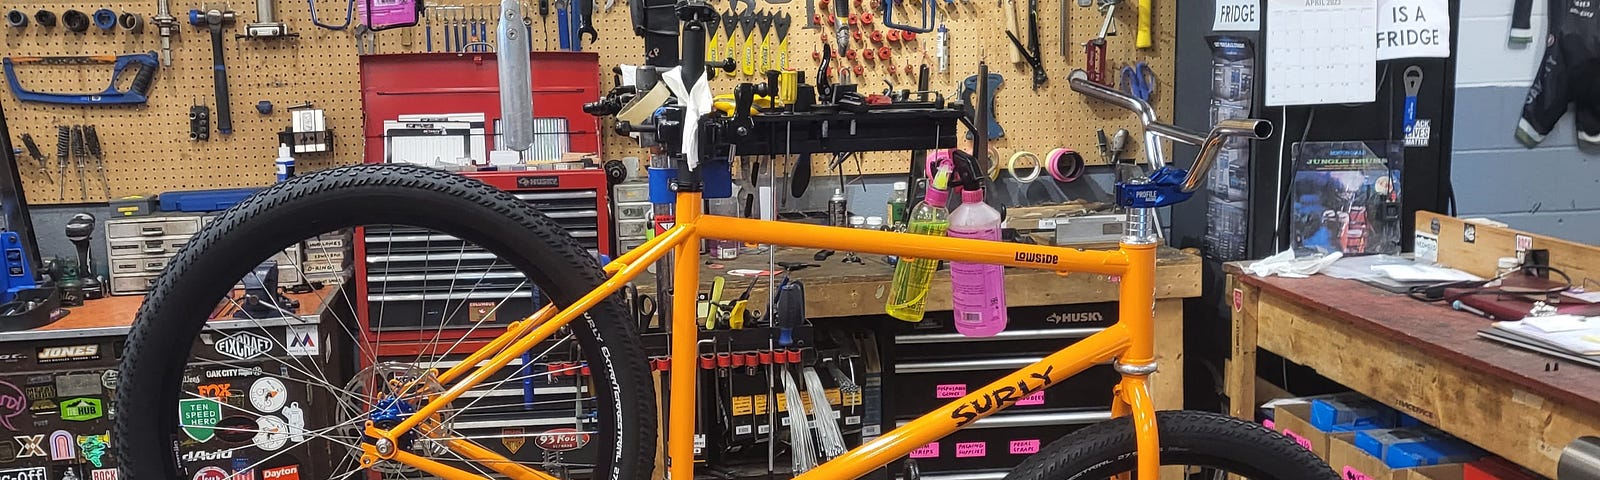 Partially built bicycle on a work stand in a bike shop